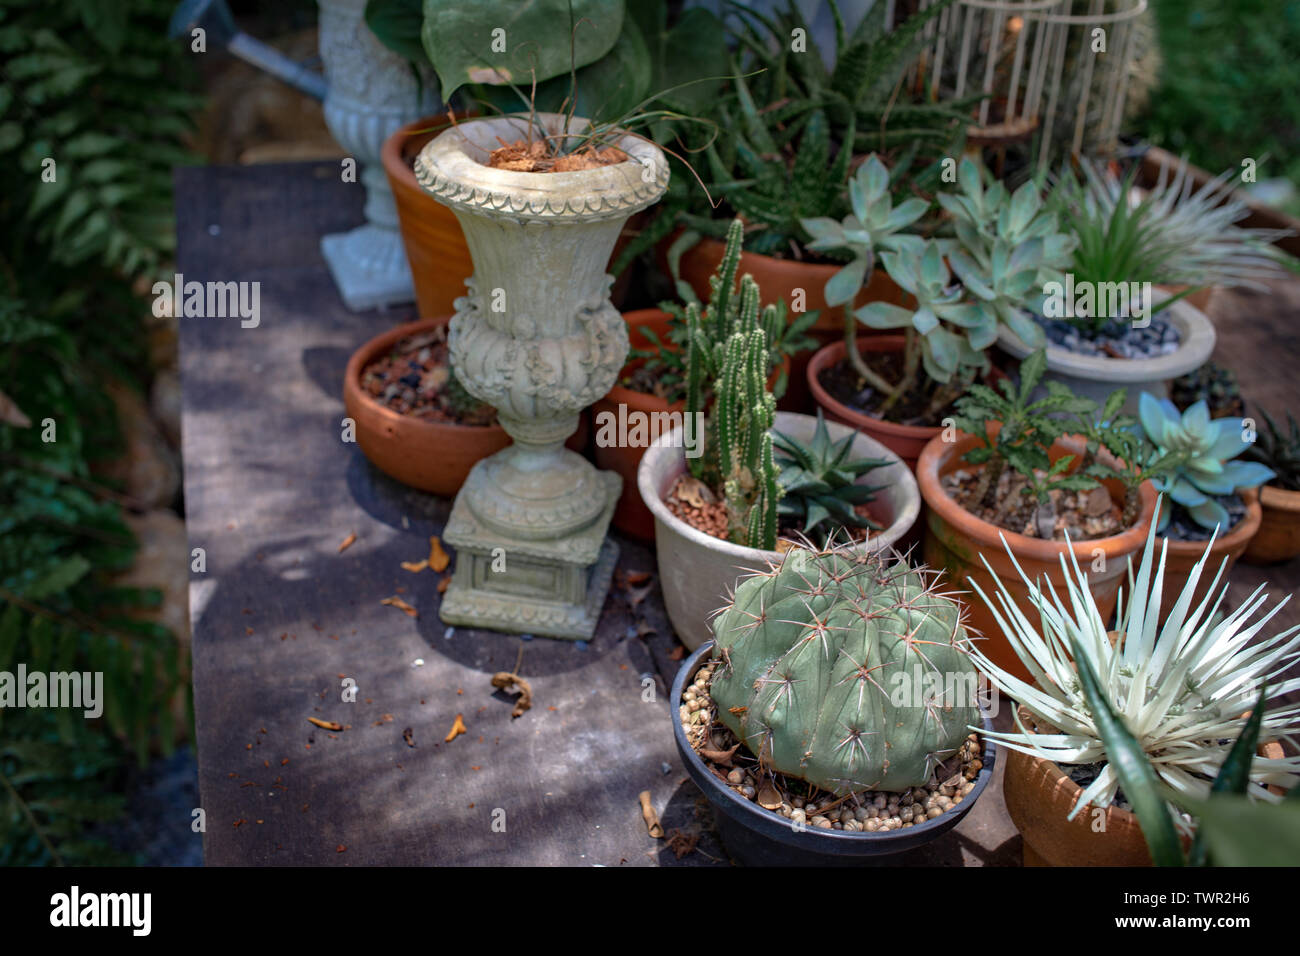 cactus decoration outdoor garden wood table from top view . hobby activities concept Stock Photo